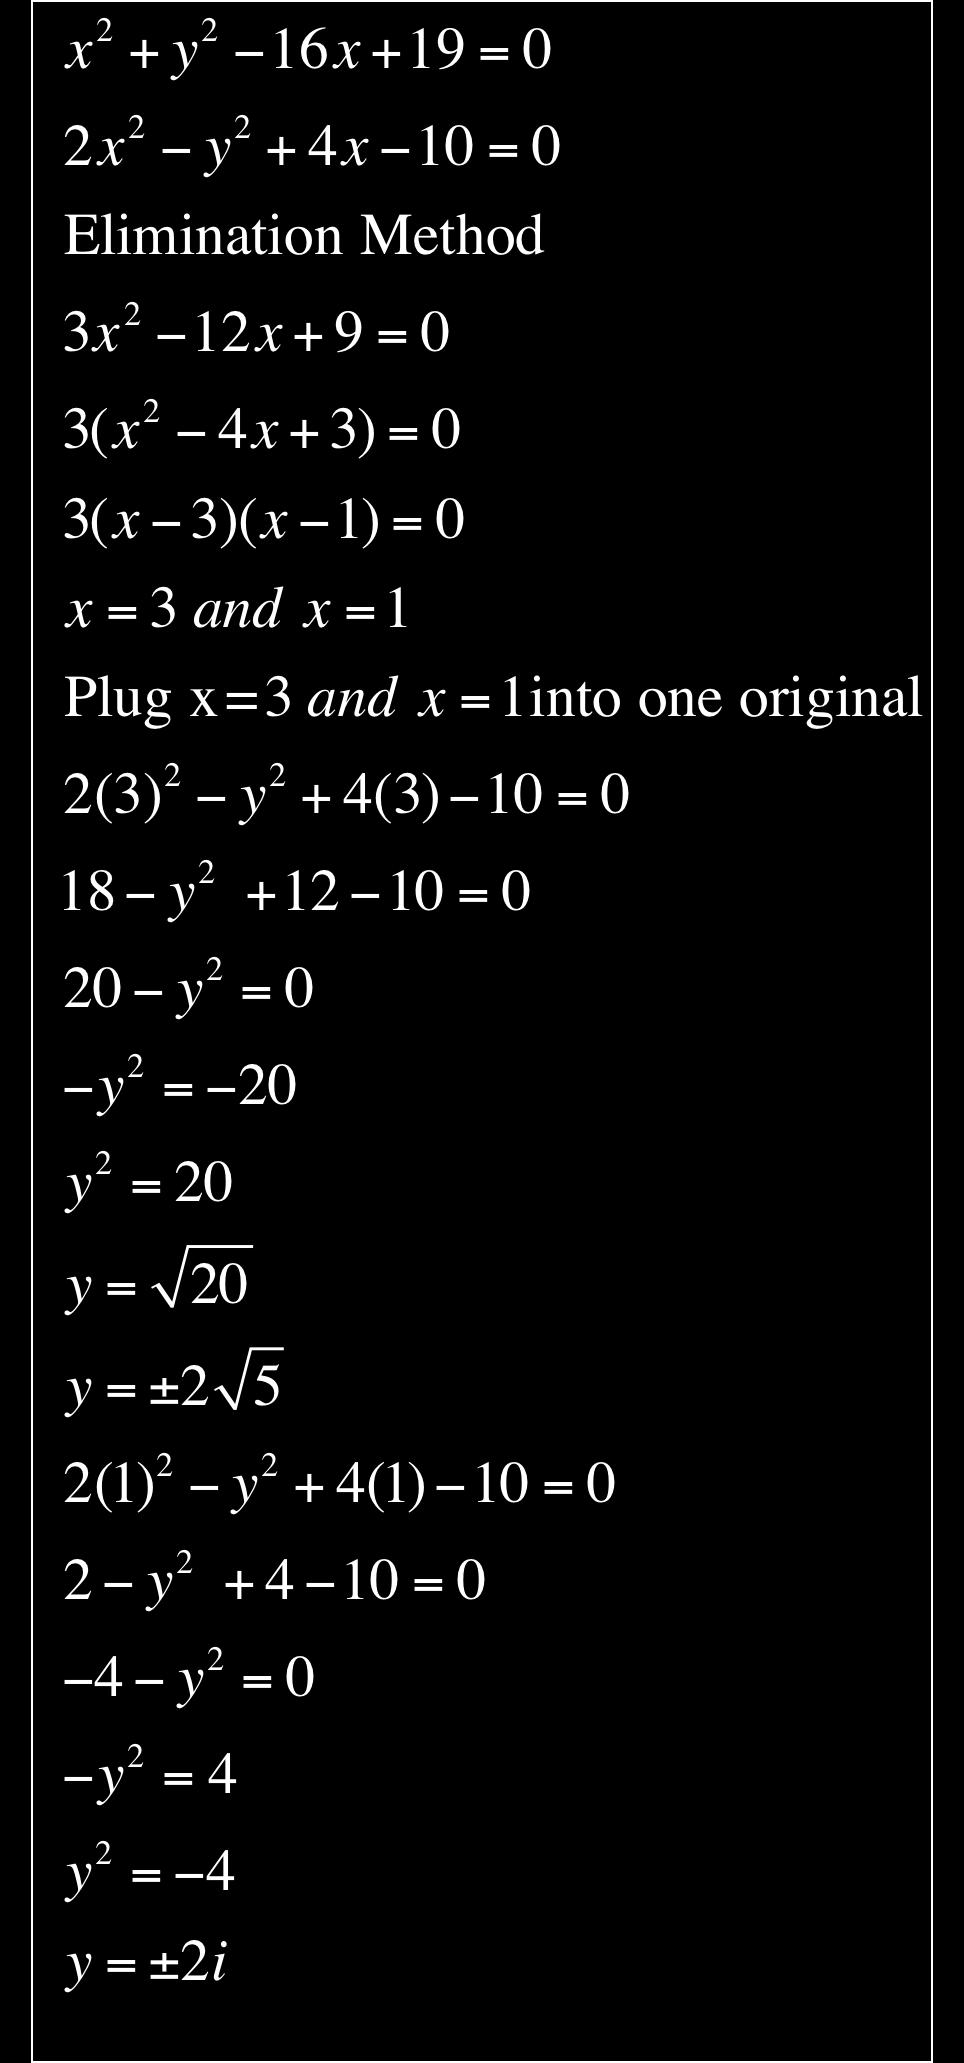 Use substitution or elimination method to solve the system of equations.